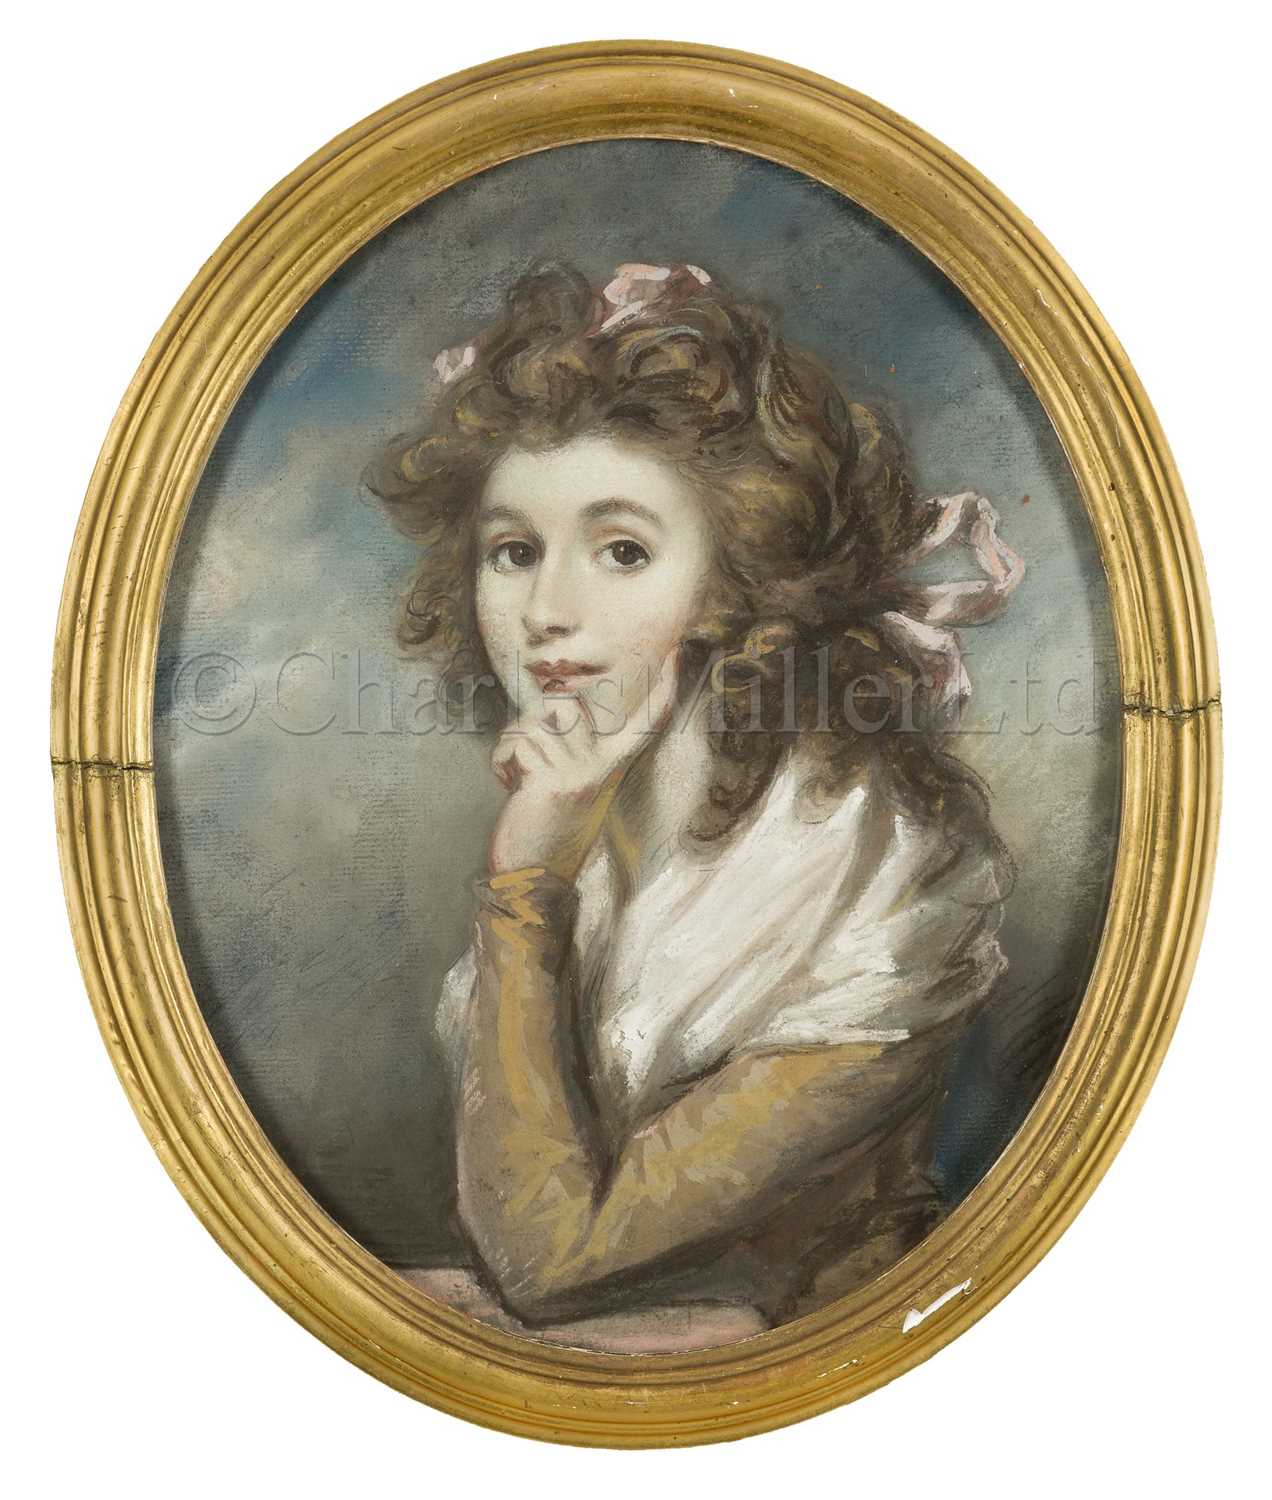 Lot 193 - ATTRIBUTED TO DANIEL GARDNER (1750-1805): A ROTHERAM FAMILY PORTRAIT OF A YOUNG LADY